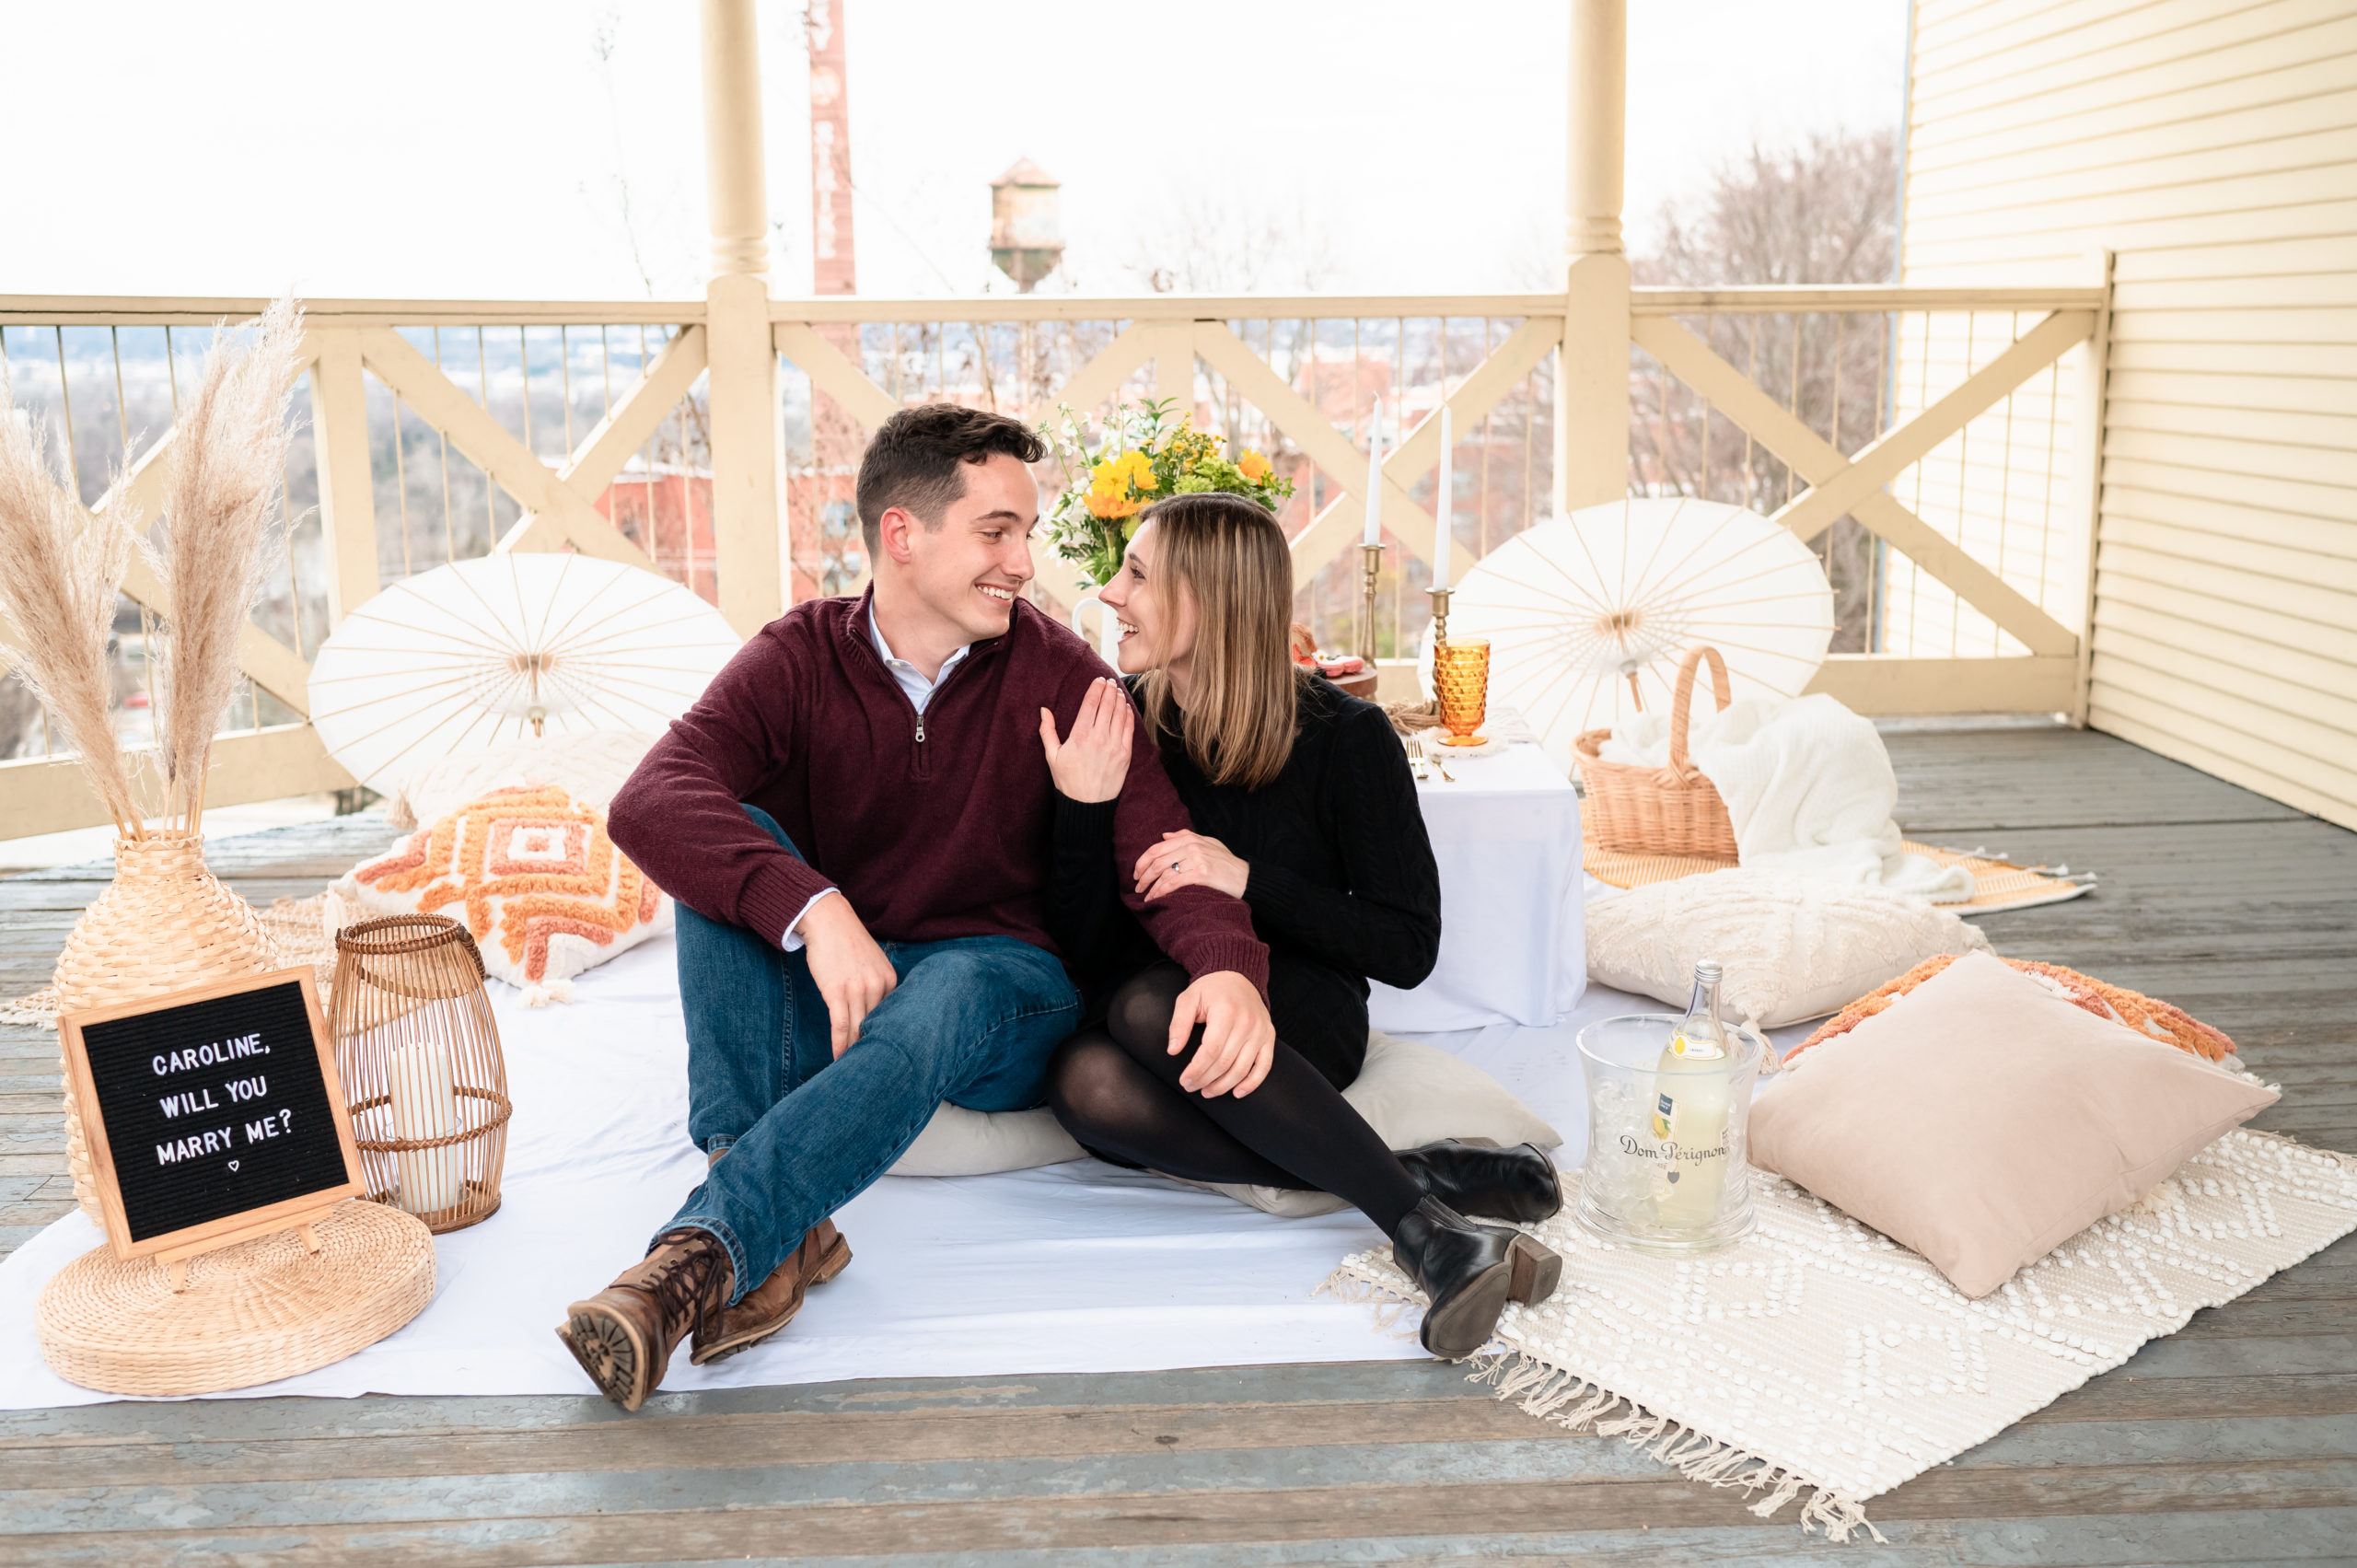 Justin and Caroline sit cuddled up under the gazebo immediately following their proposal at Libby Hill. Behind them, a luxury picnic experience. by RVA Picnics They gaze smilingly at one another.